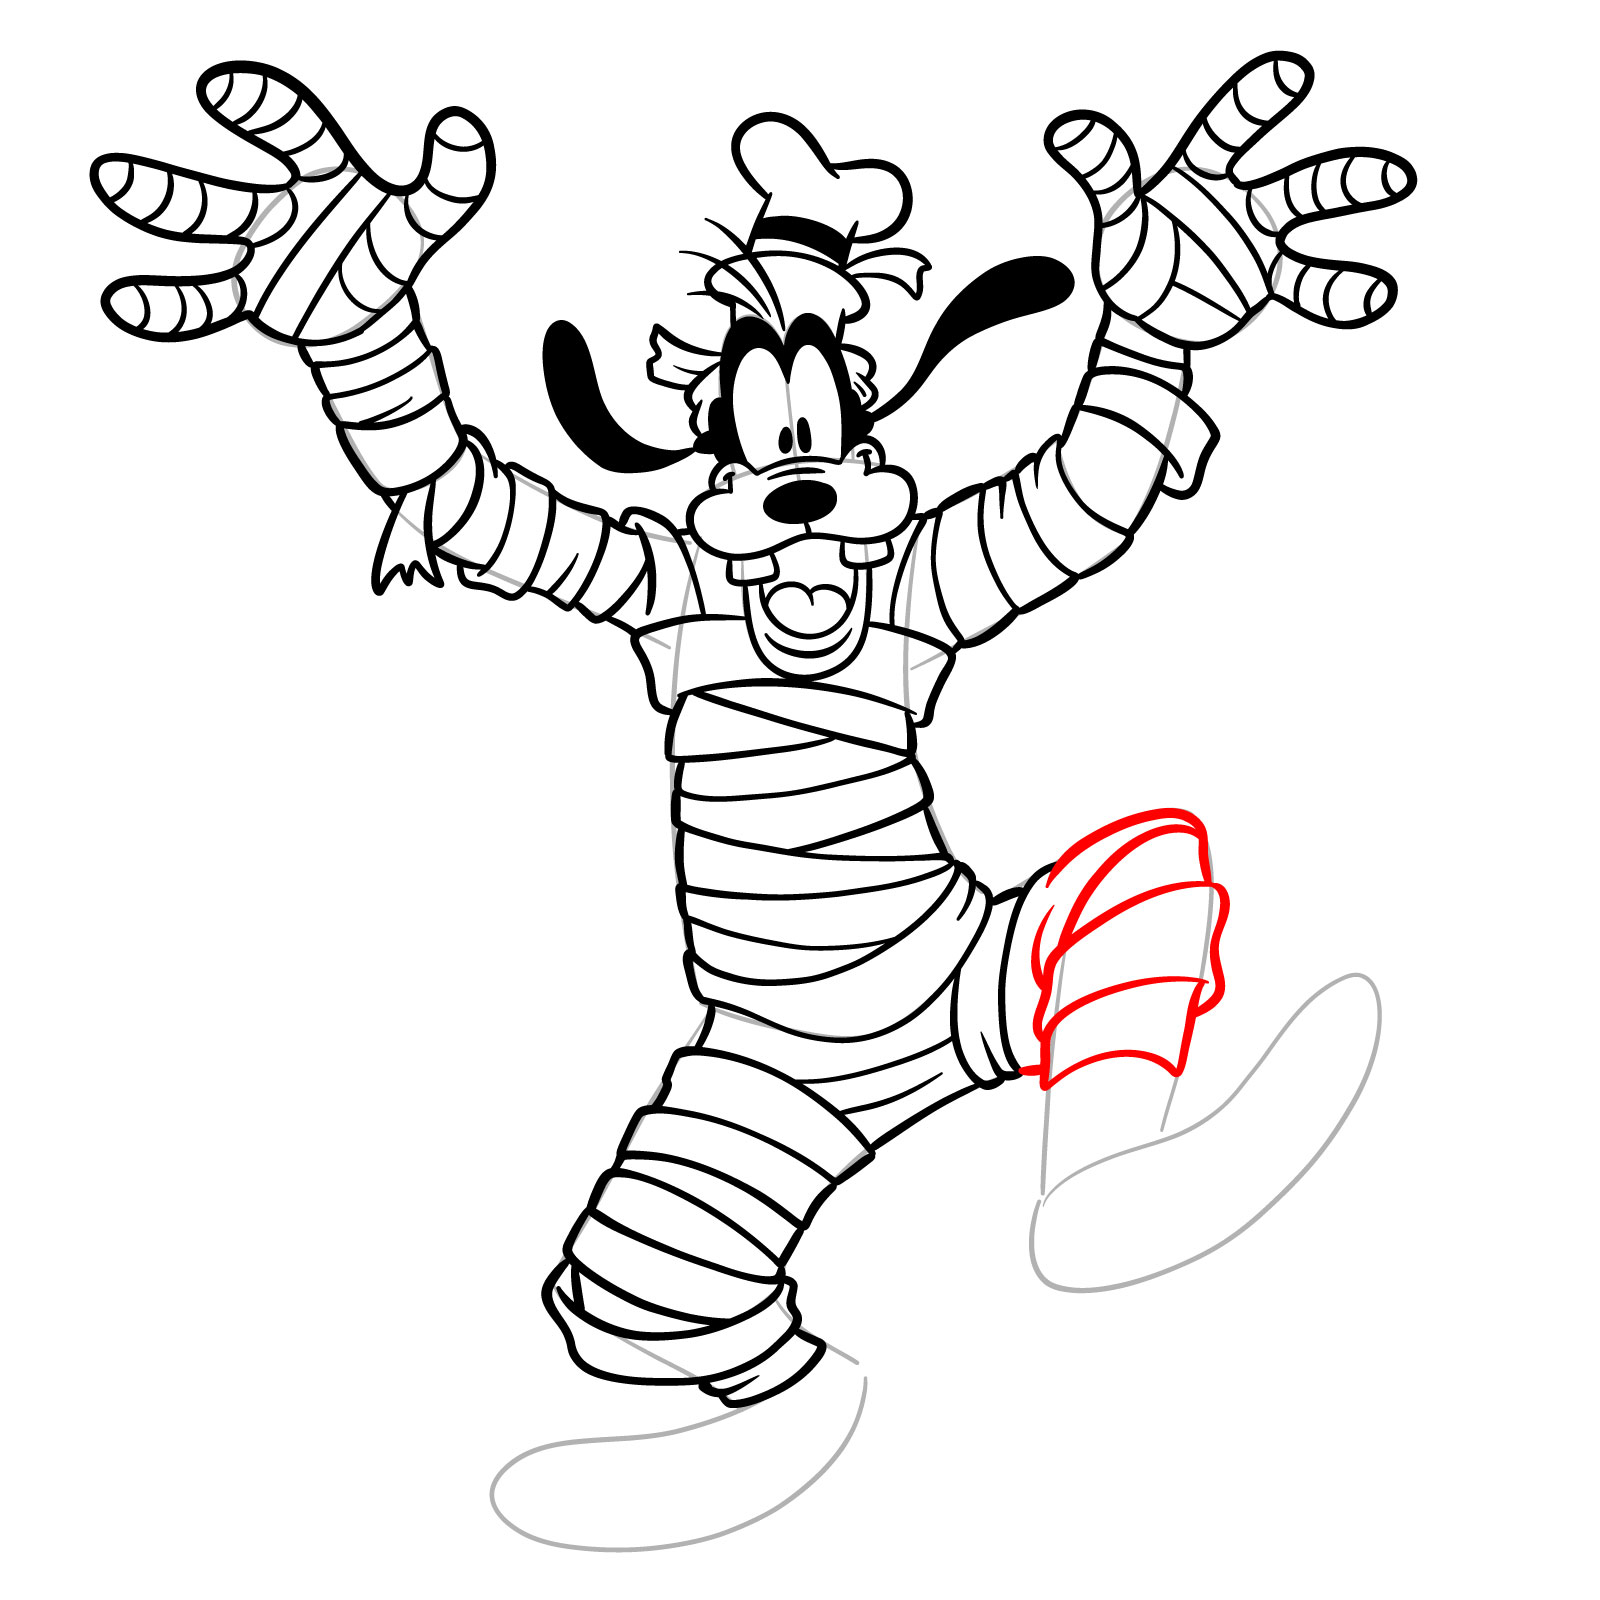 How to draw Halloween Goofy as a mummy - step 27